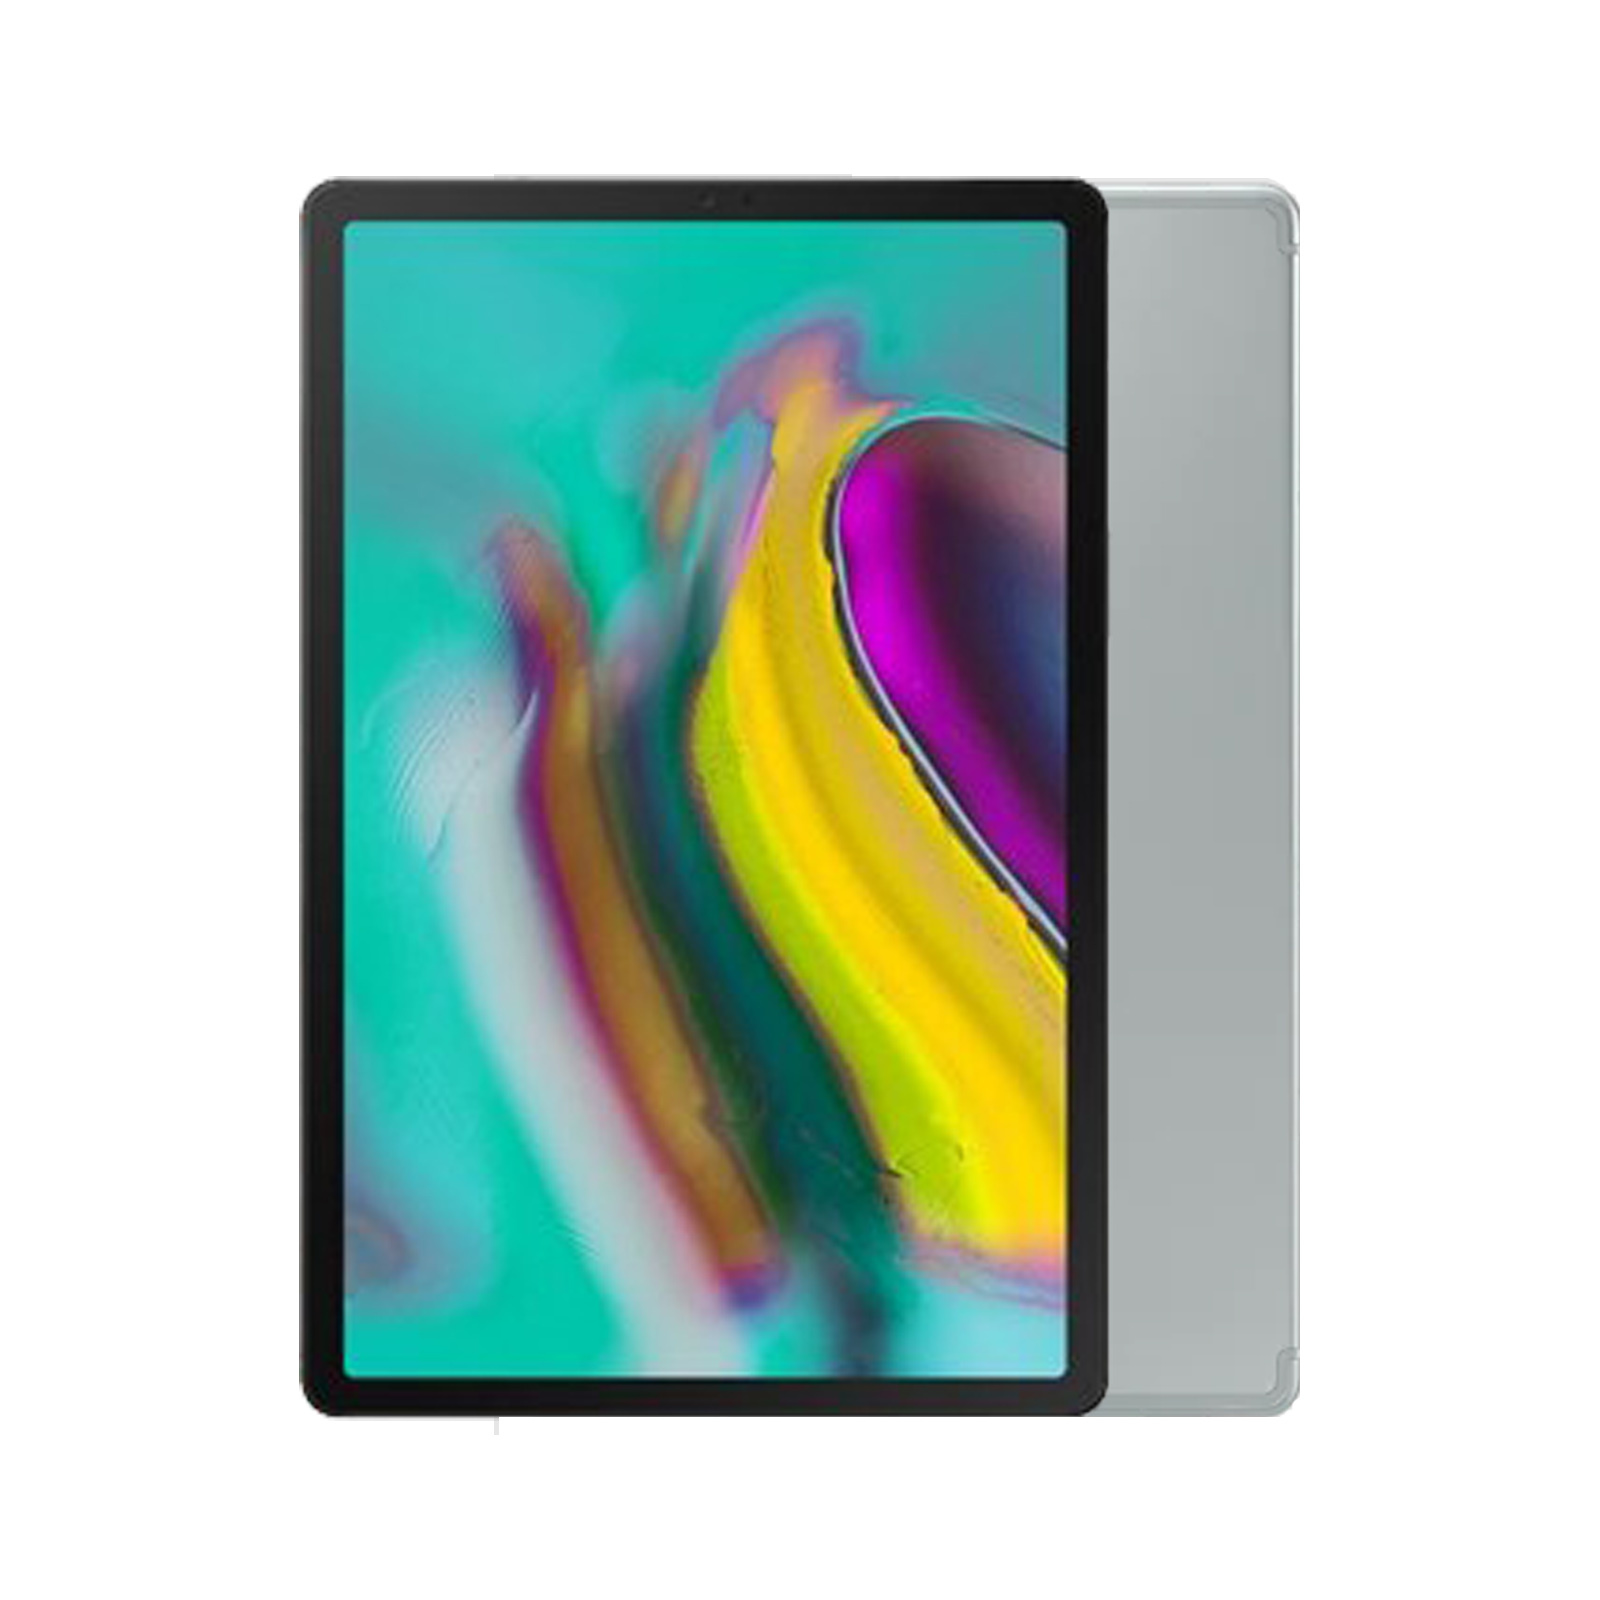 Samsung Galaxy Tab S5e 10.5 [Wi-Fi Only] Only] [64GB] [Silver] [As New]